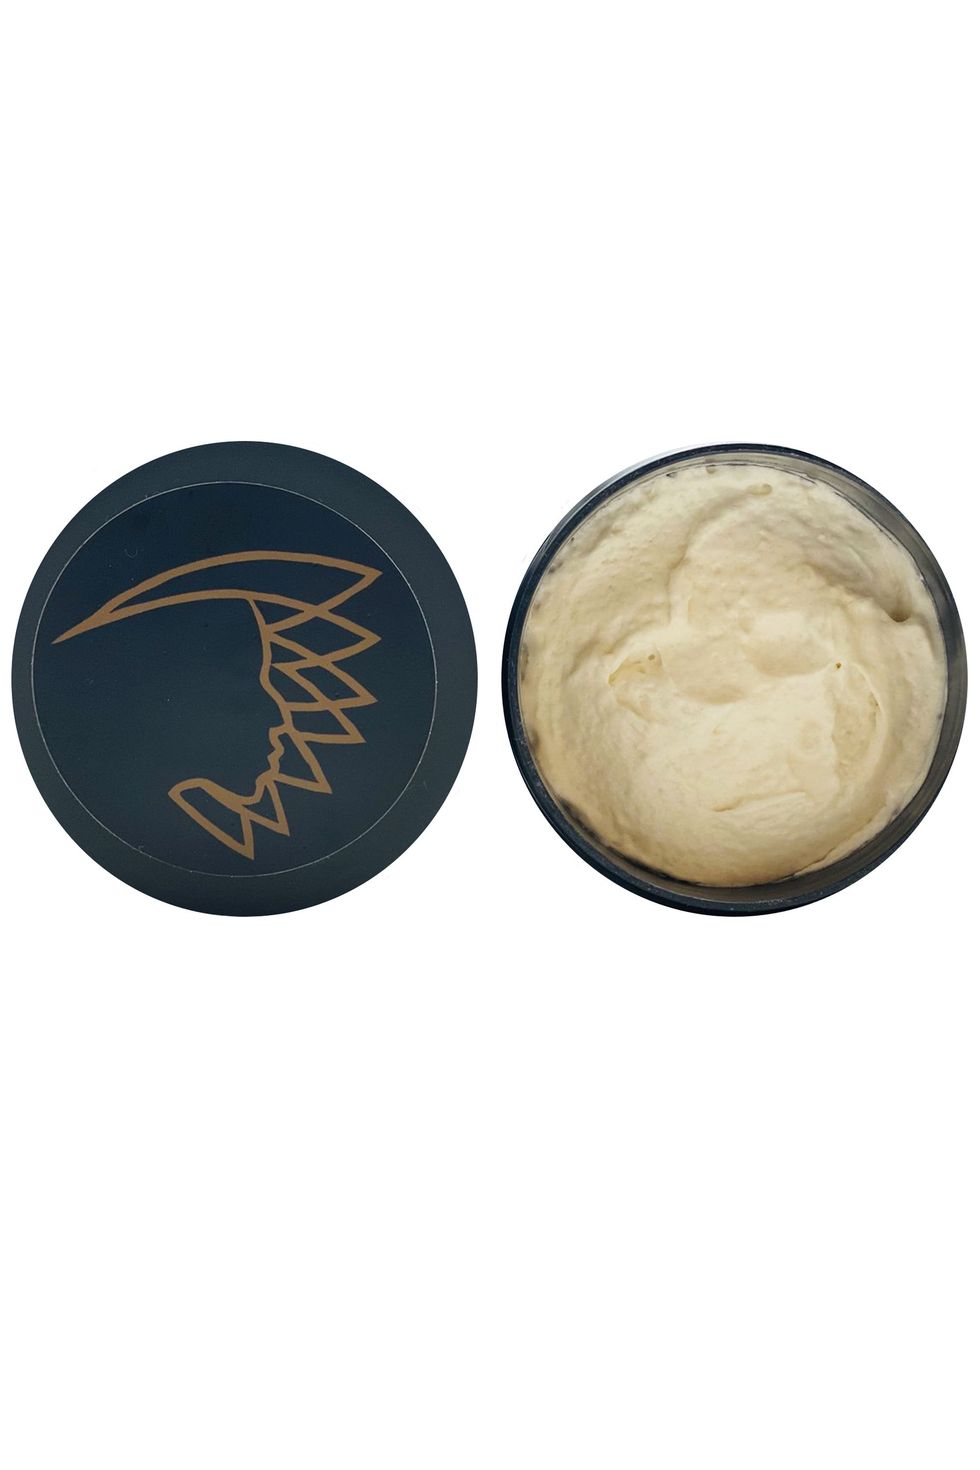 Whipped Shea Butter in Copper Gypsy